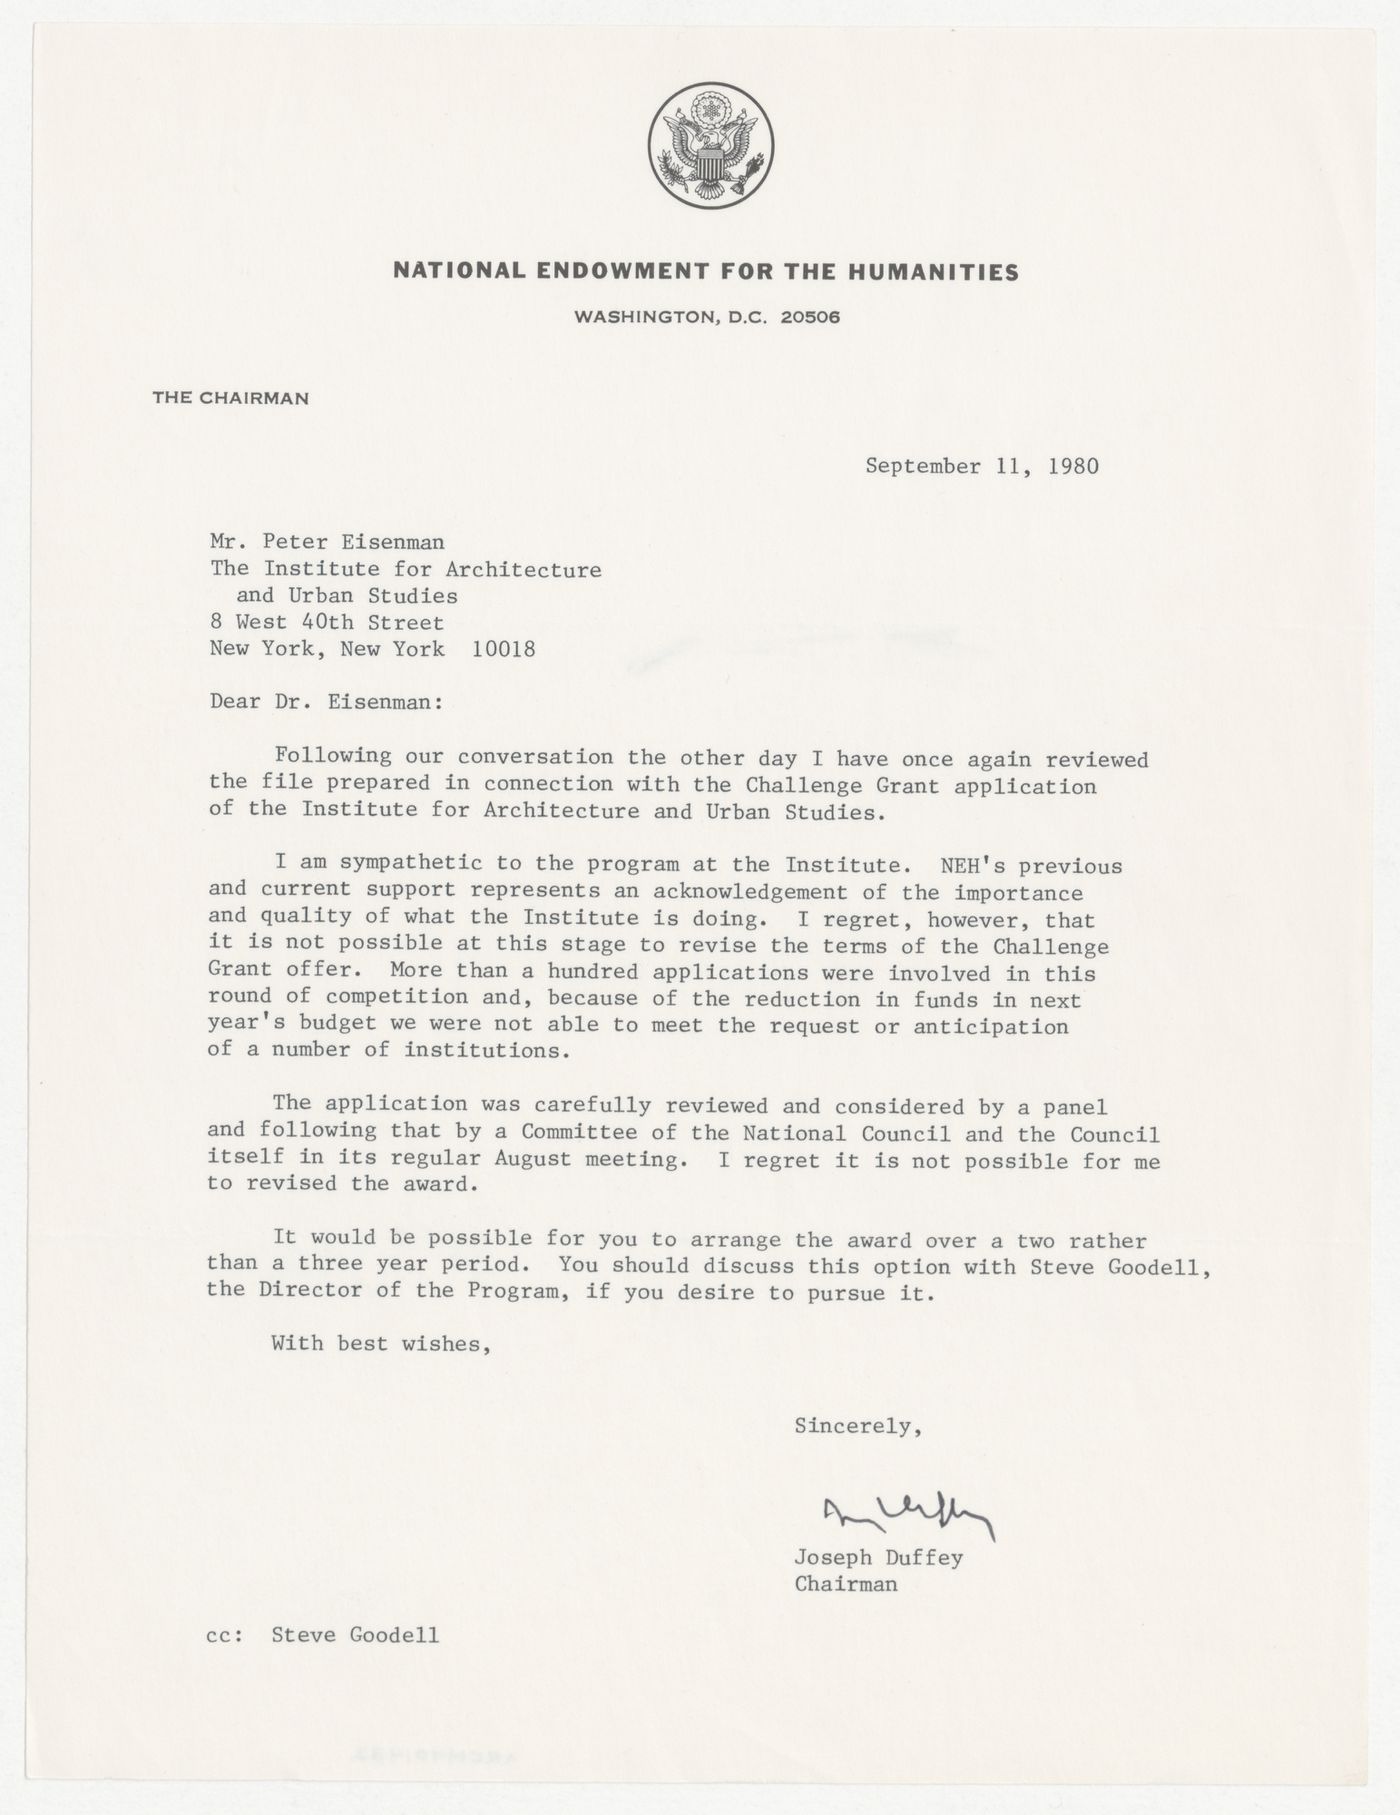 Letter from Joseph Duffey to Peter D. Eisenman about application to National Endowment for the Humanities (NEH) Challenge Grant